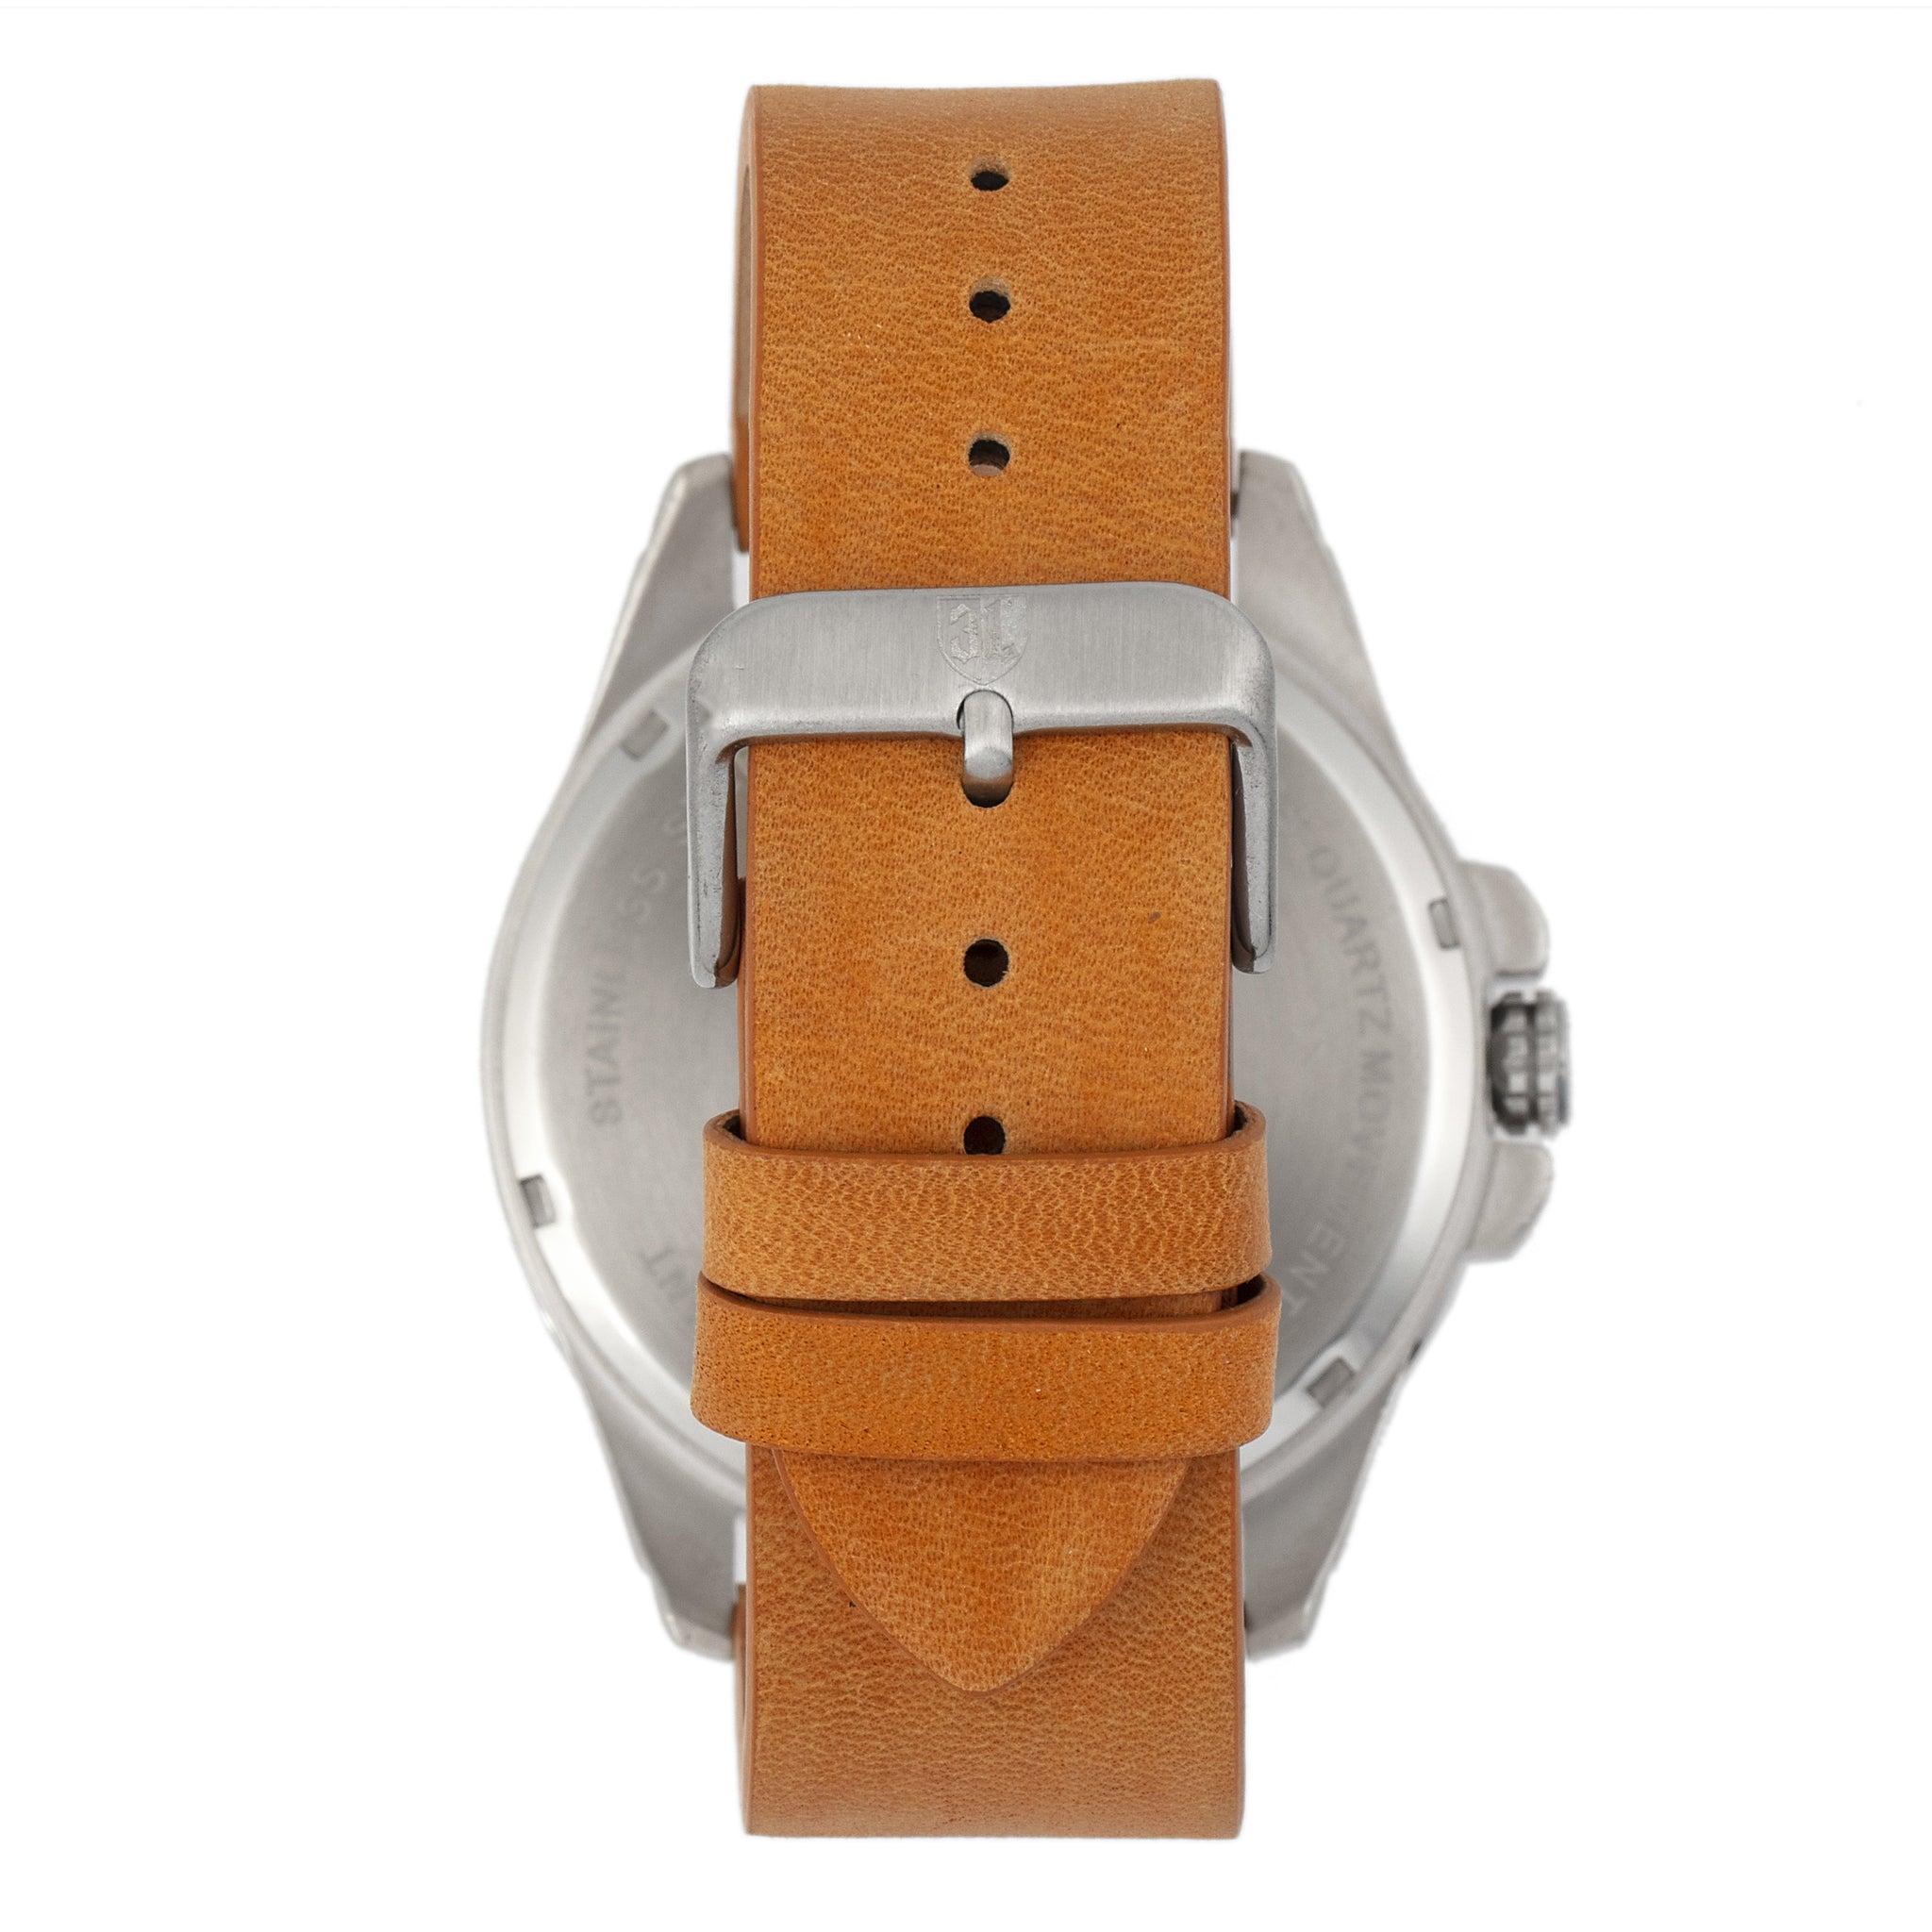 Three Leagues Artillery Leather-Band Watch with Date - Black/Camel - TLW3L102